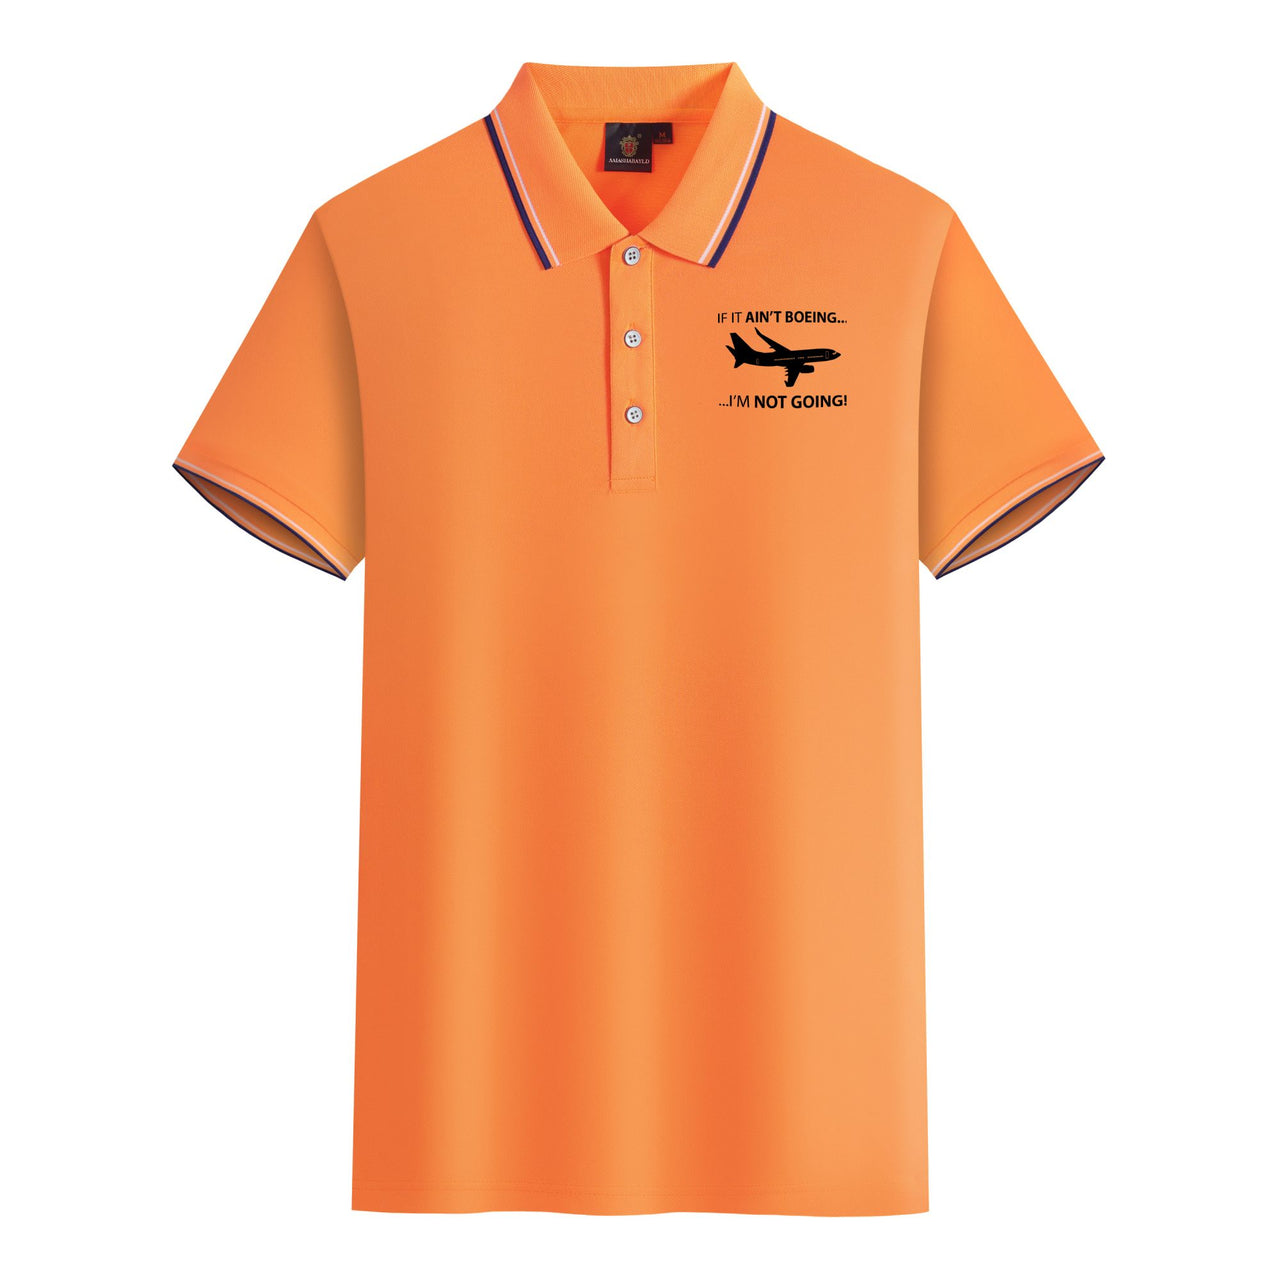 If It Ain't Boeing I'm Not Going! Designed Stylish Polo T-Shirts